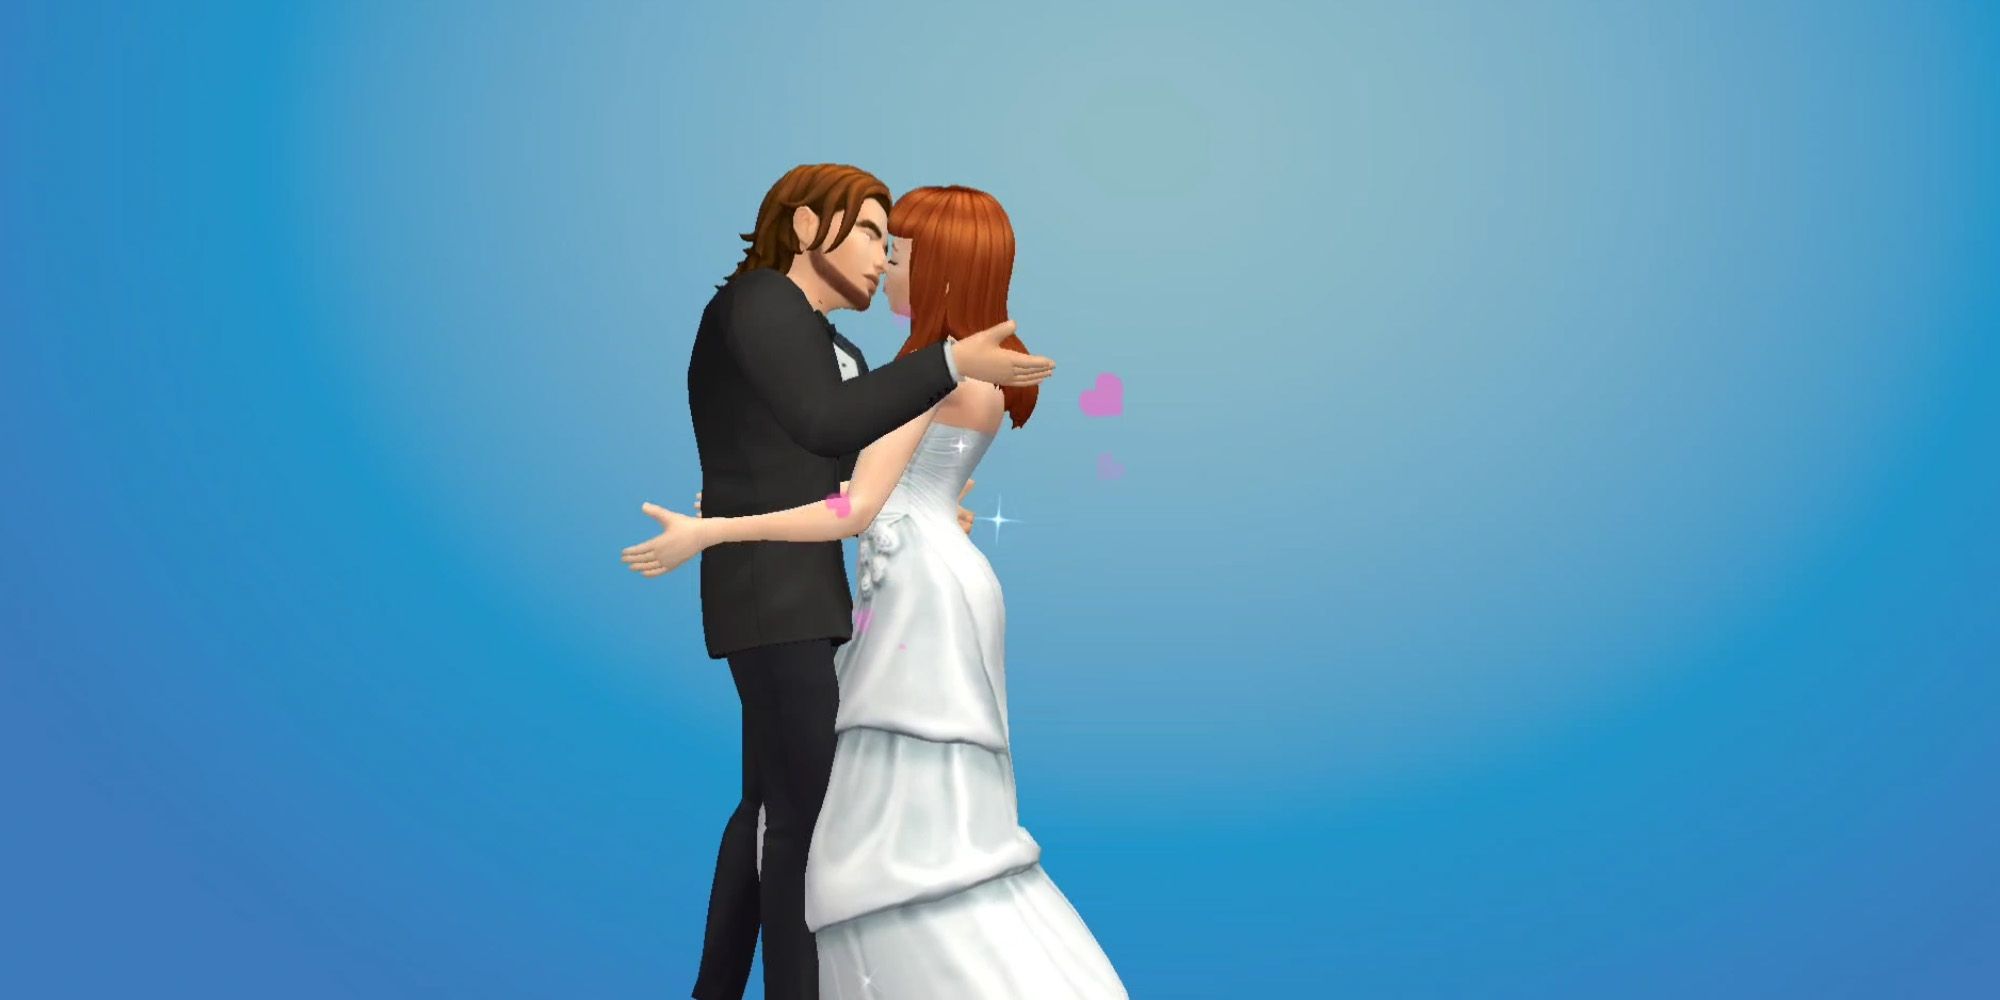 the sims mobile marry other players and move in or stay in separate homes